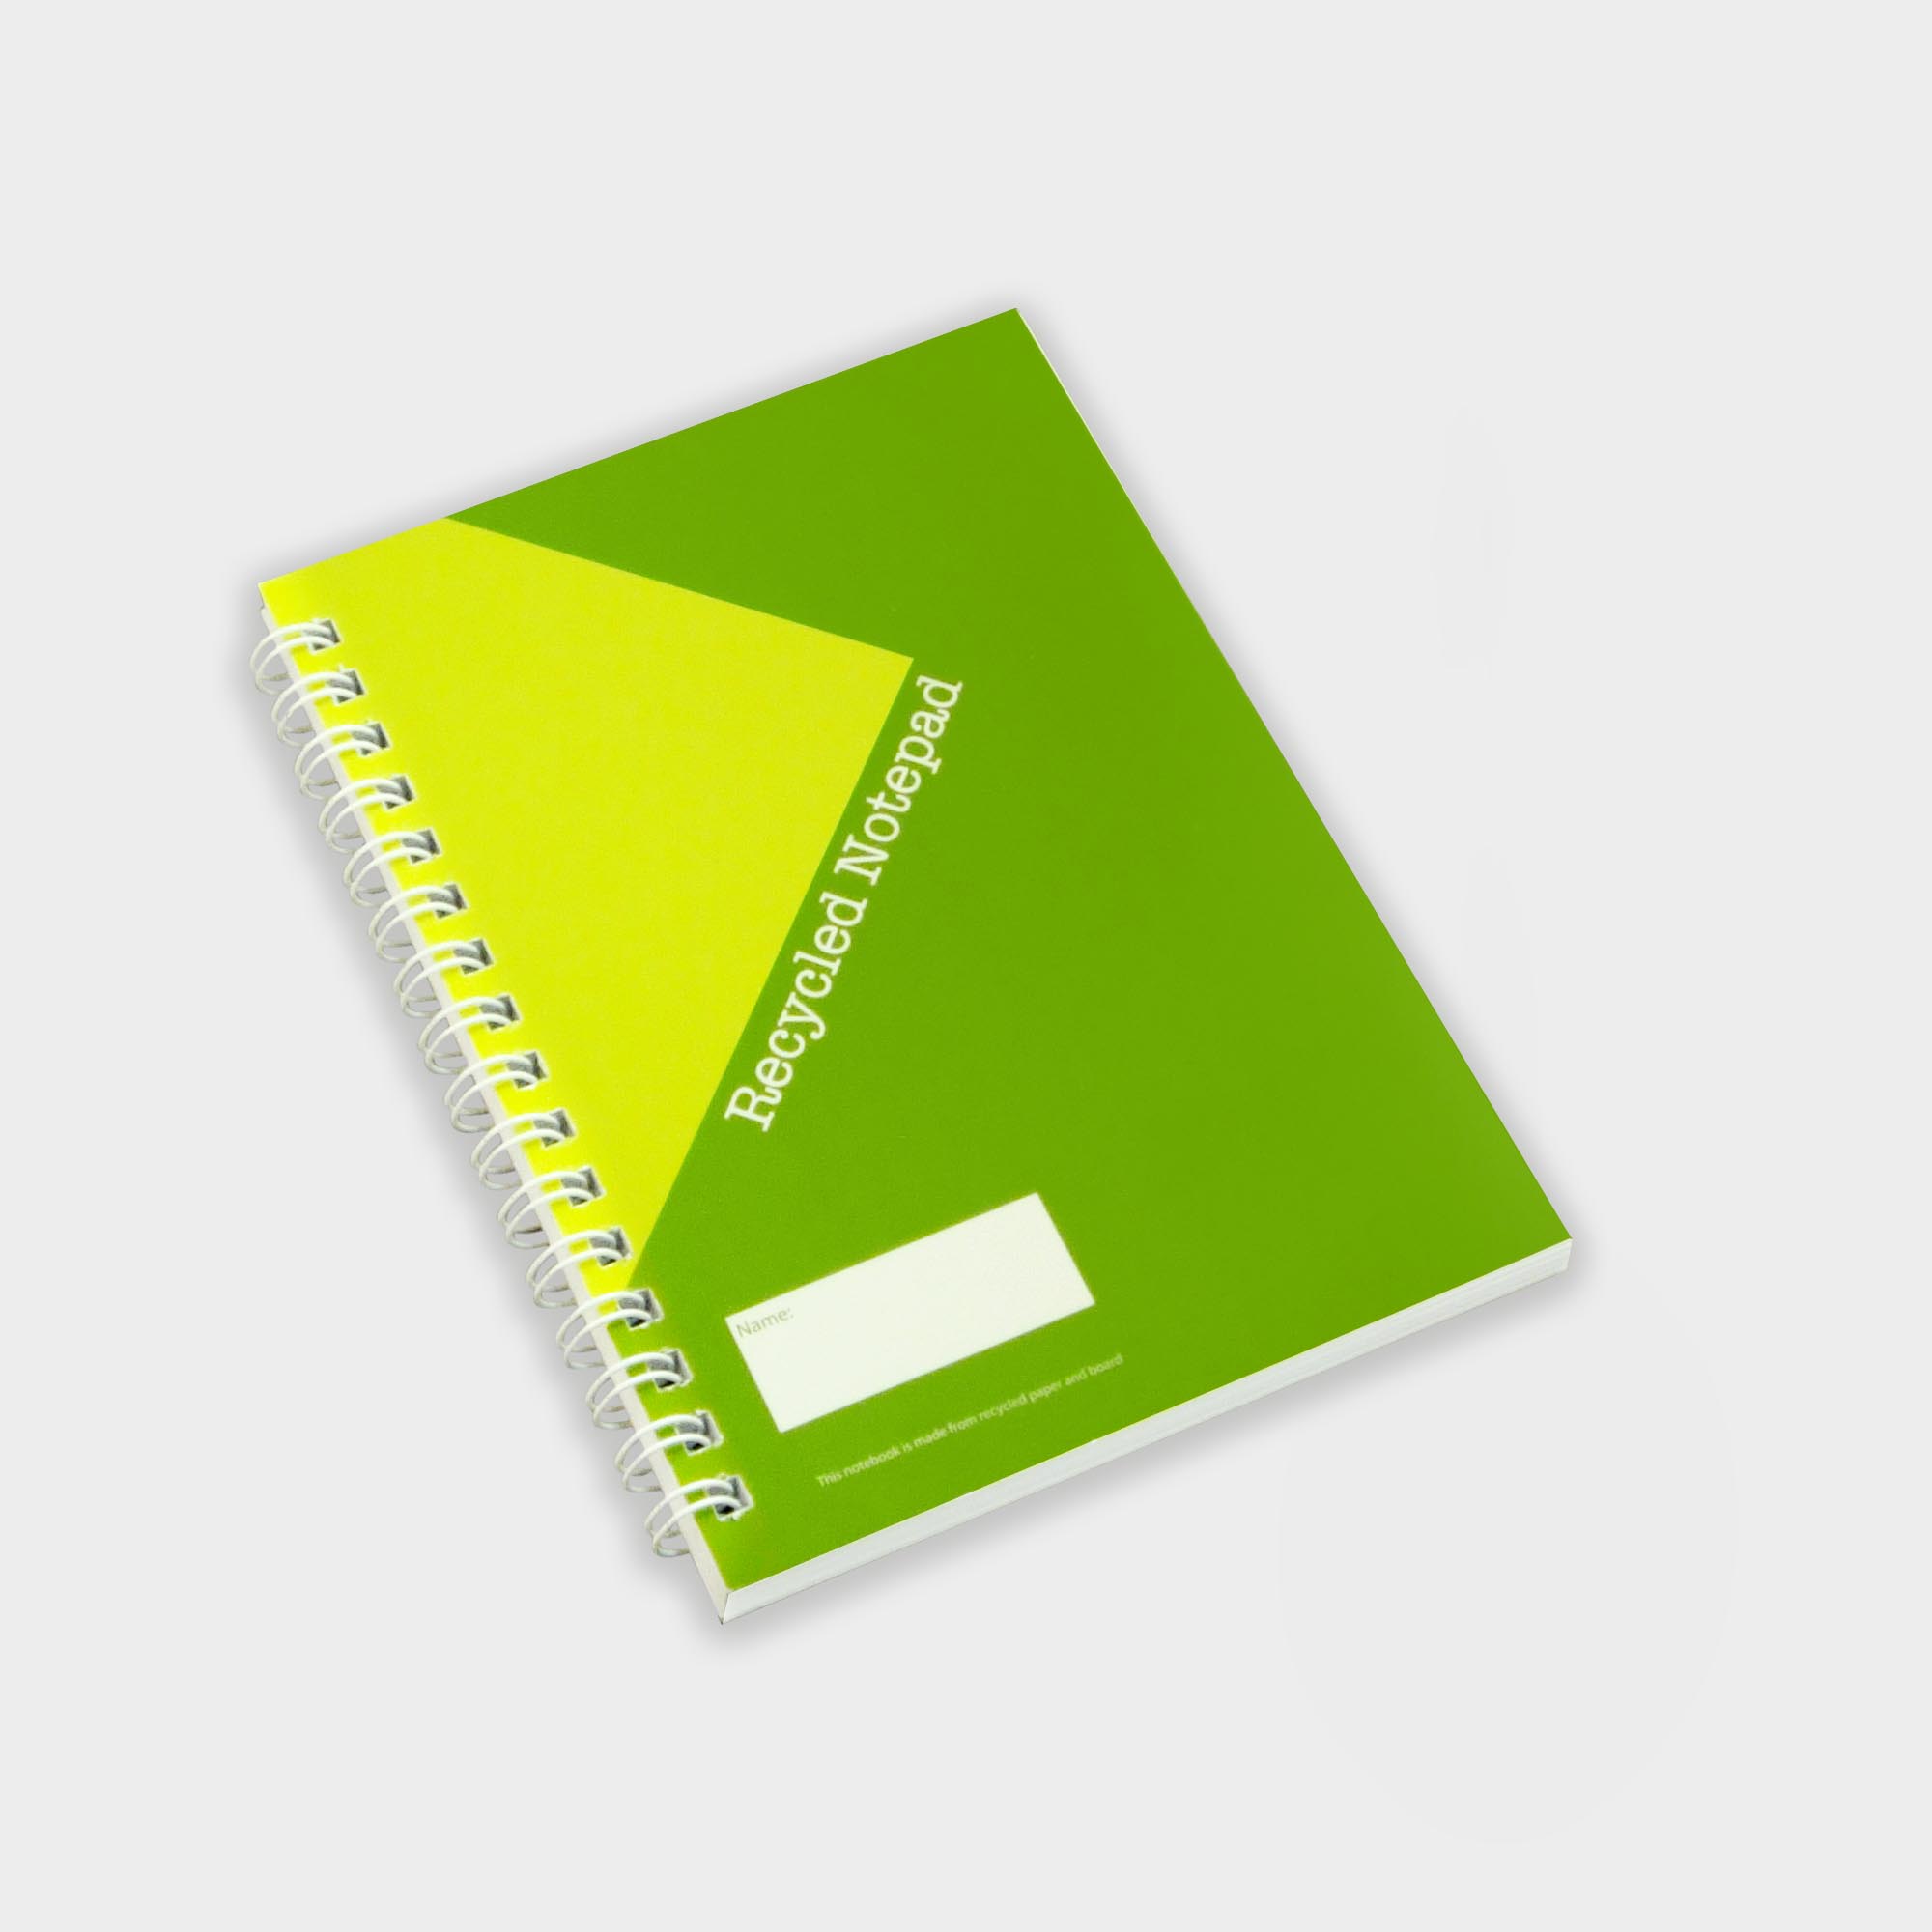 The Green & Good Wirebound Notebook is made from recycled paper - size A6. The cover is 250gsm, the sheets are 80gsm and the backboard is 500 micron. Comes wirebound with 50 sheets as standard. Please contact us if you require a bespoke number of sheets.